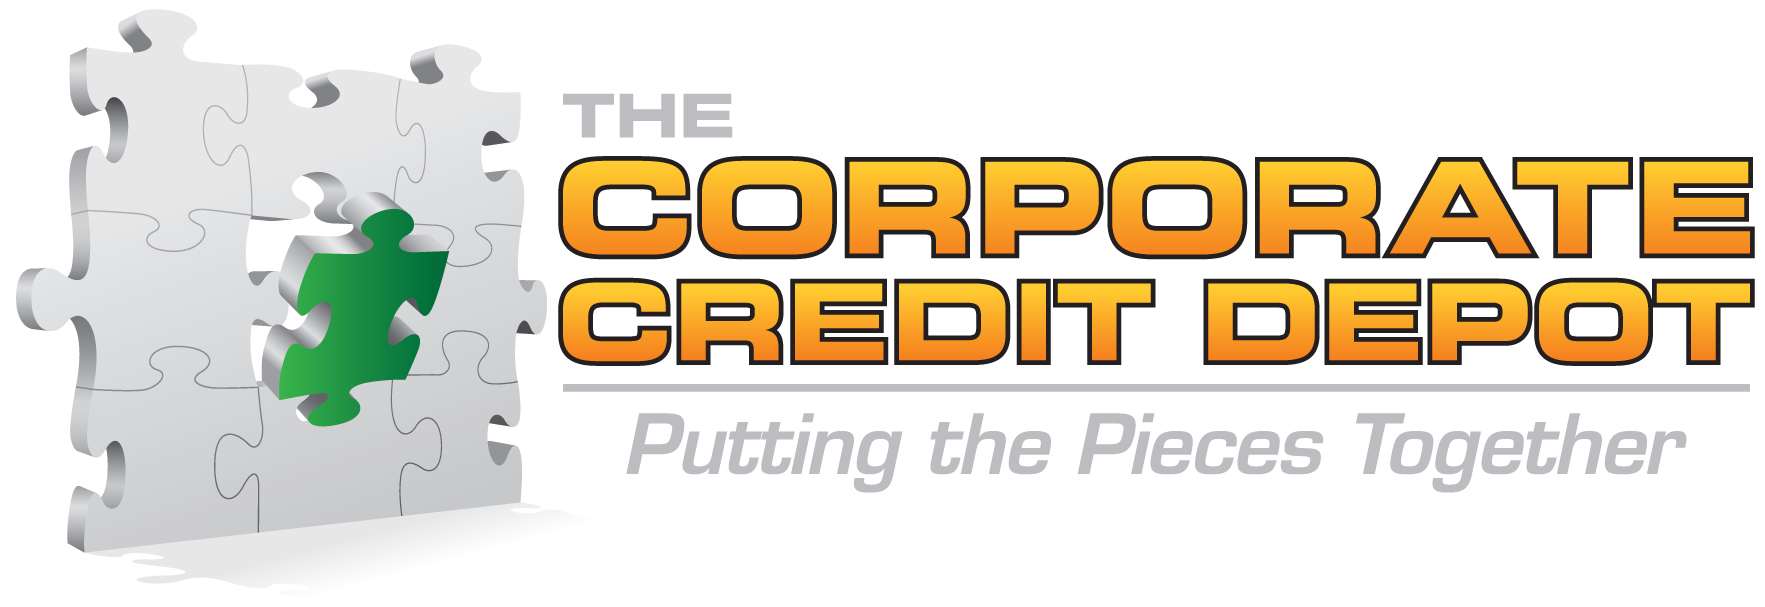 The Corporate Credit Depot